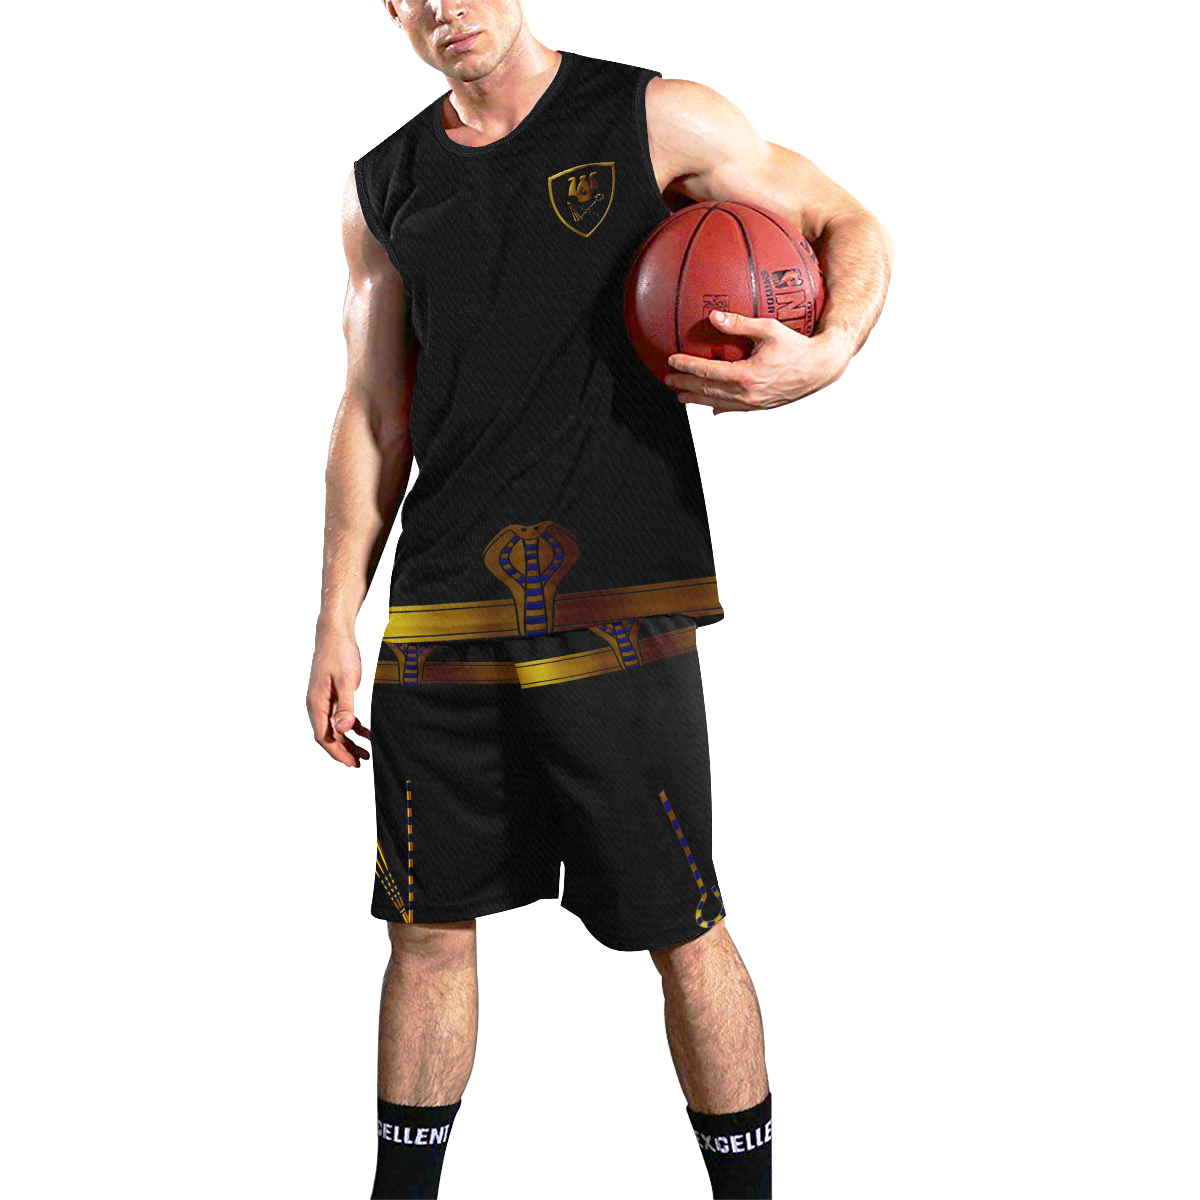 ATEF SOLDIER All Over Print Basketball Uniform